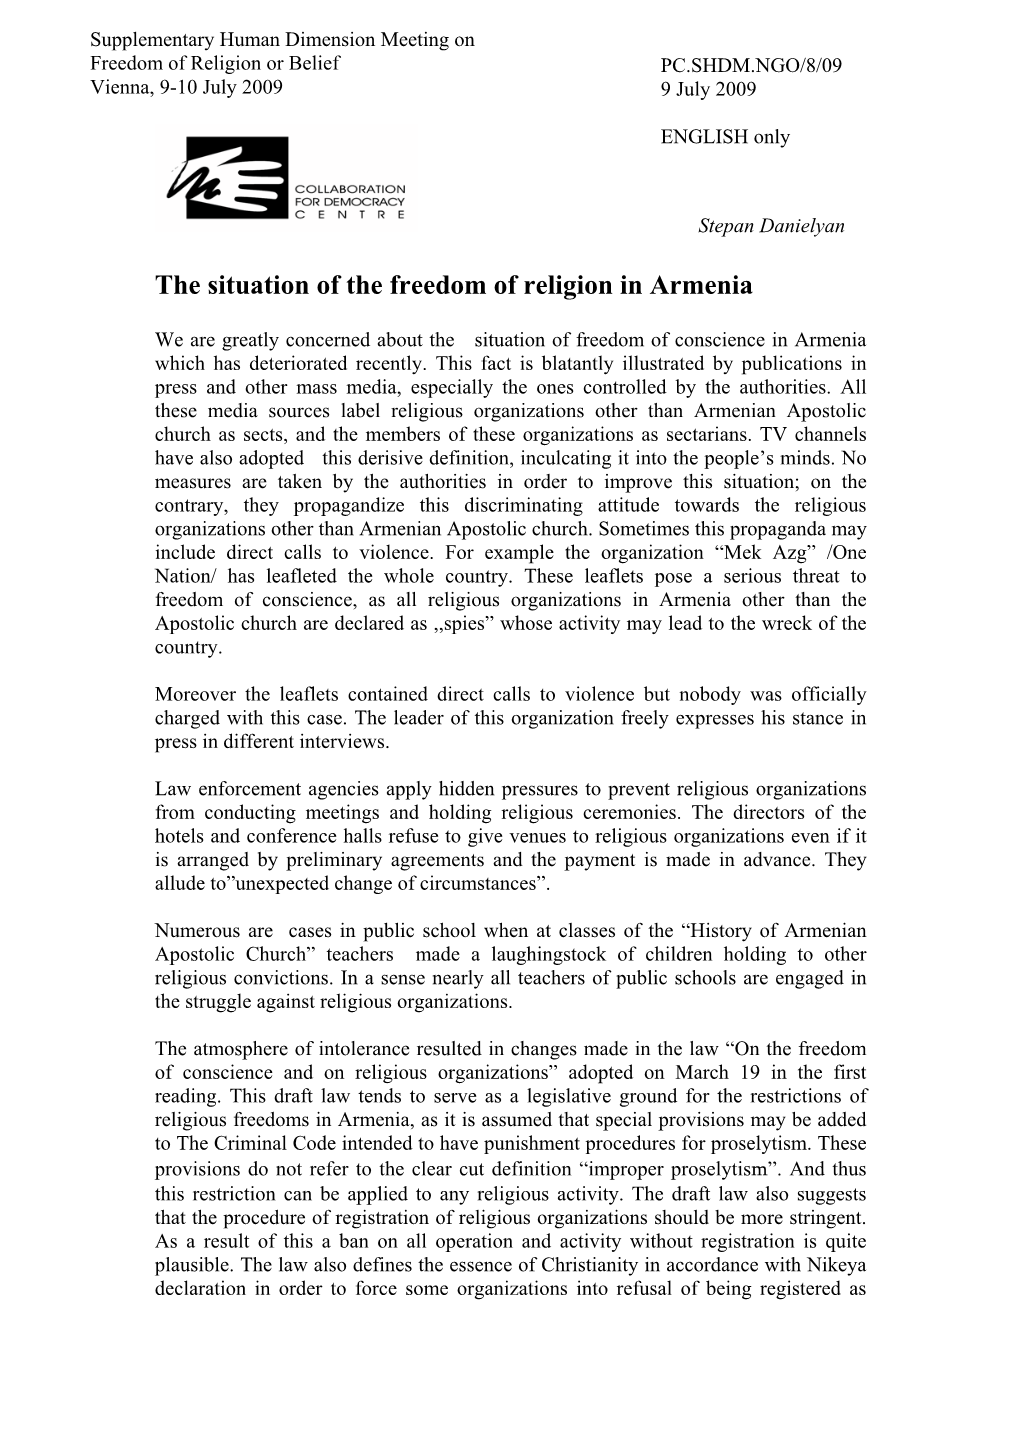 The Situation of the Freedom of Religion in Armenia